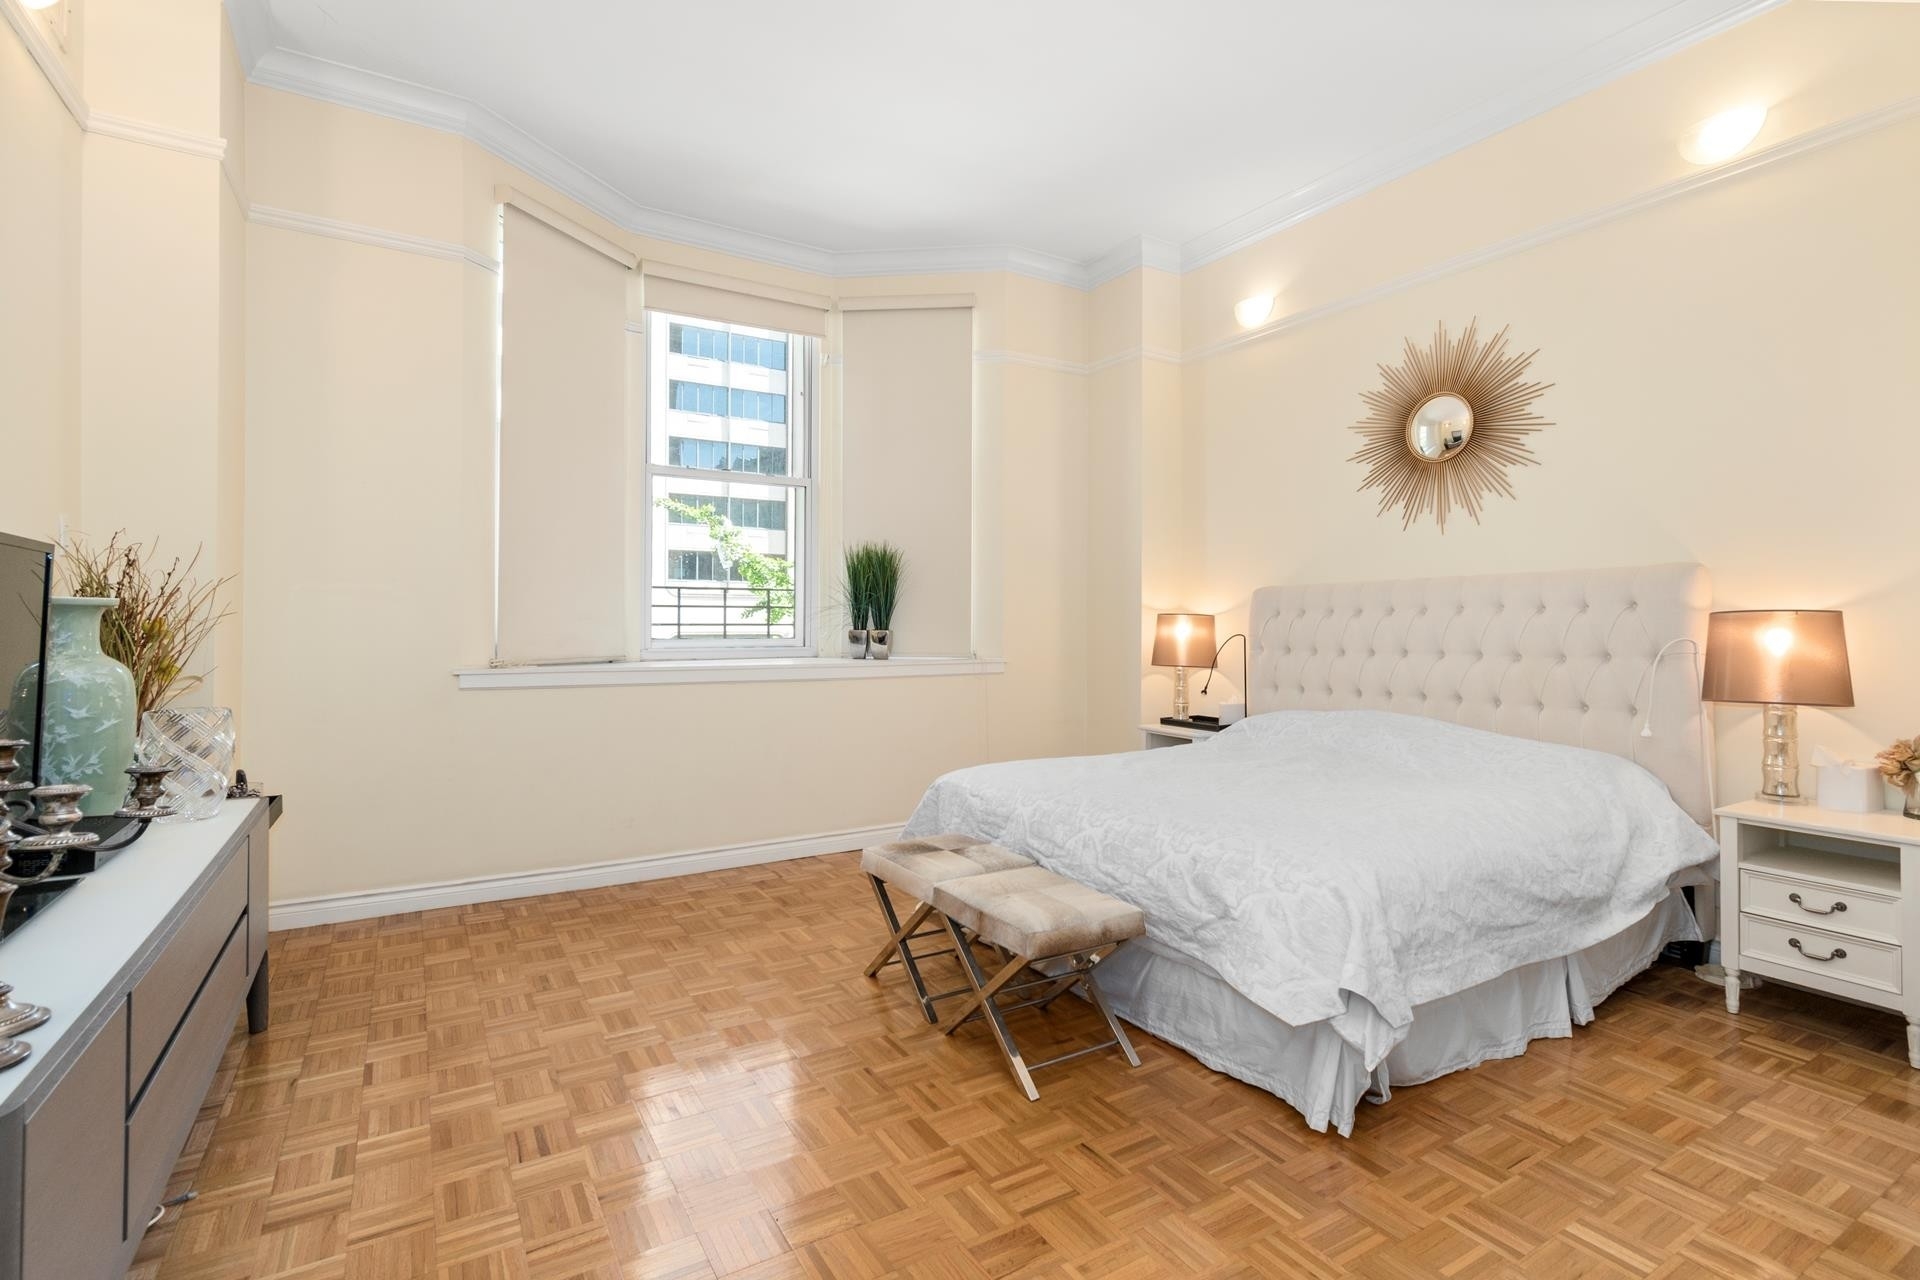 5. Rentals at 74 East 79th St, 3 New York